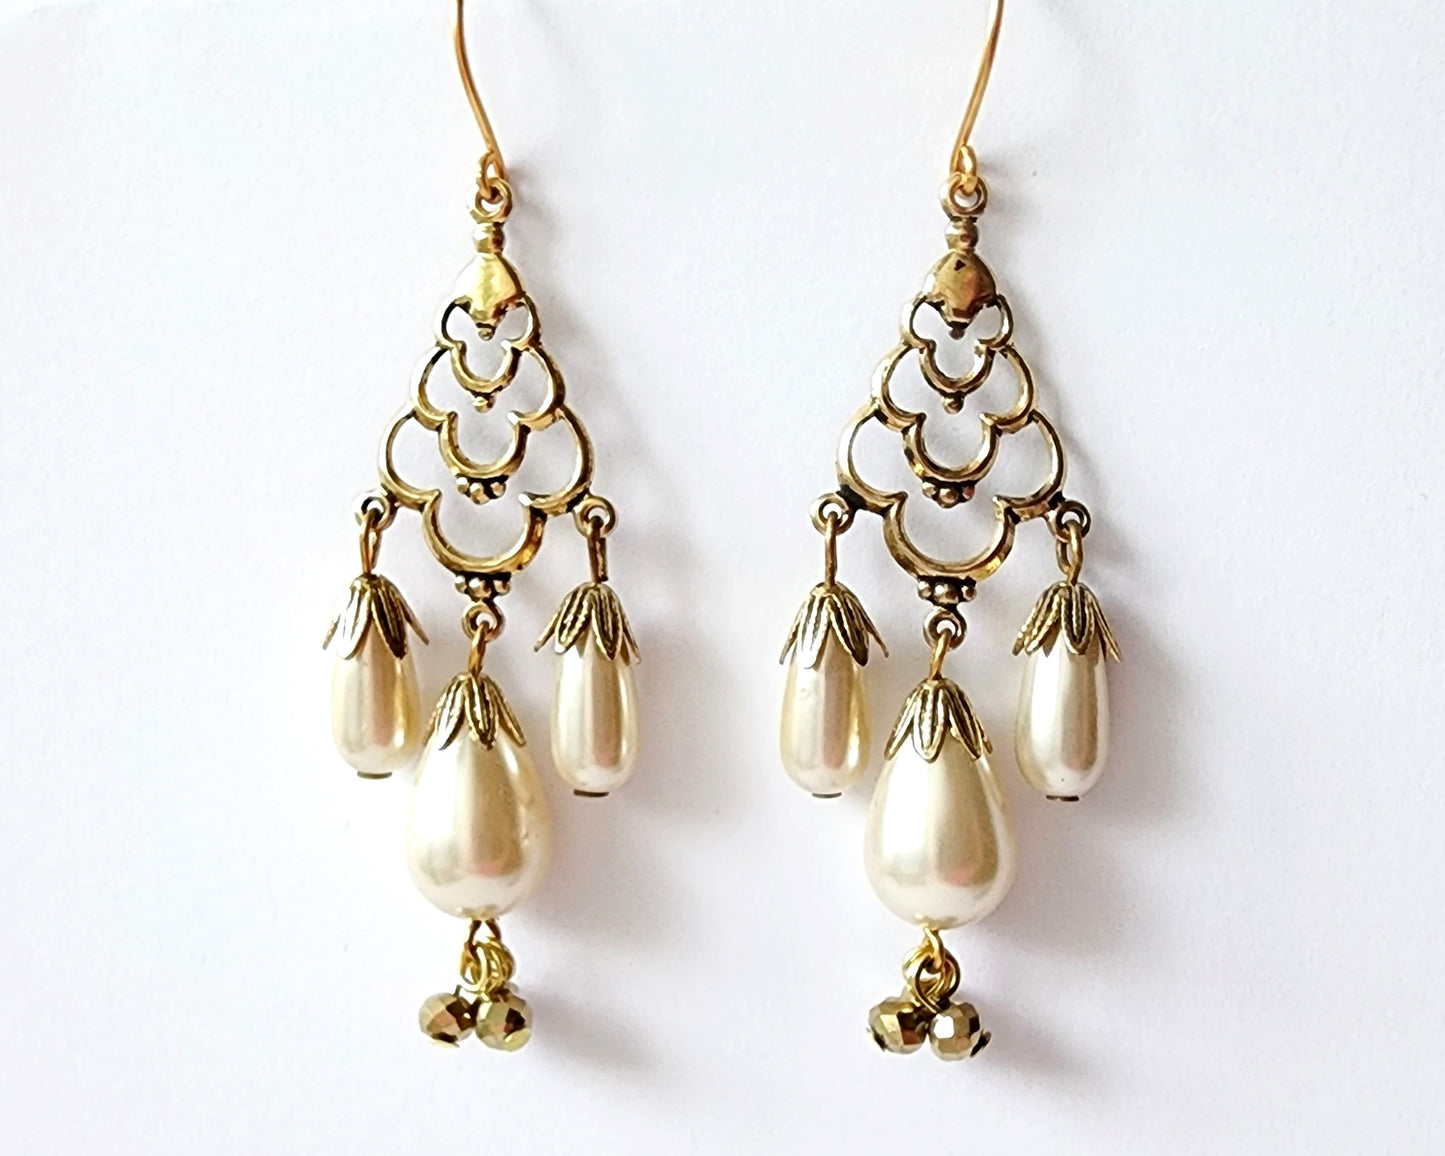 Long Vintage Pearl Drop Gold Crystal Earrings, Long Pearl Chandelier earrings with drop shaped pearls and gold crystal